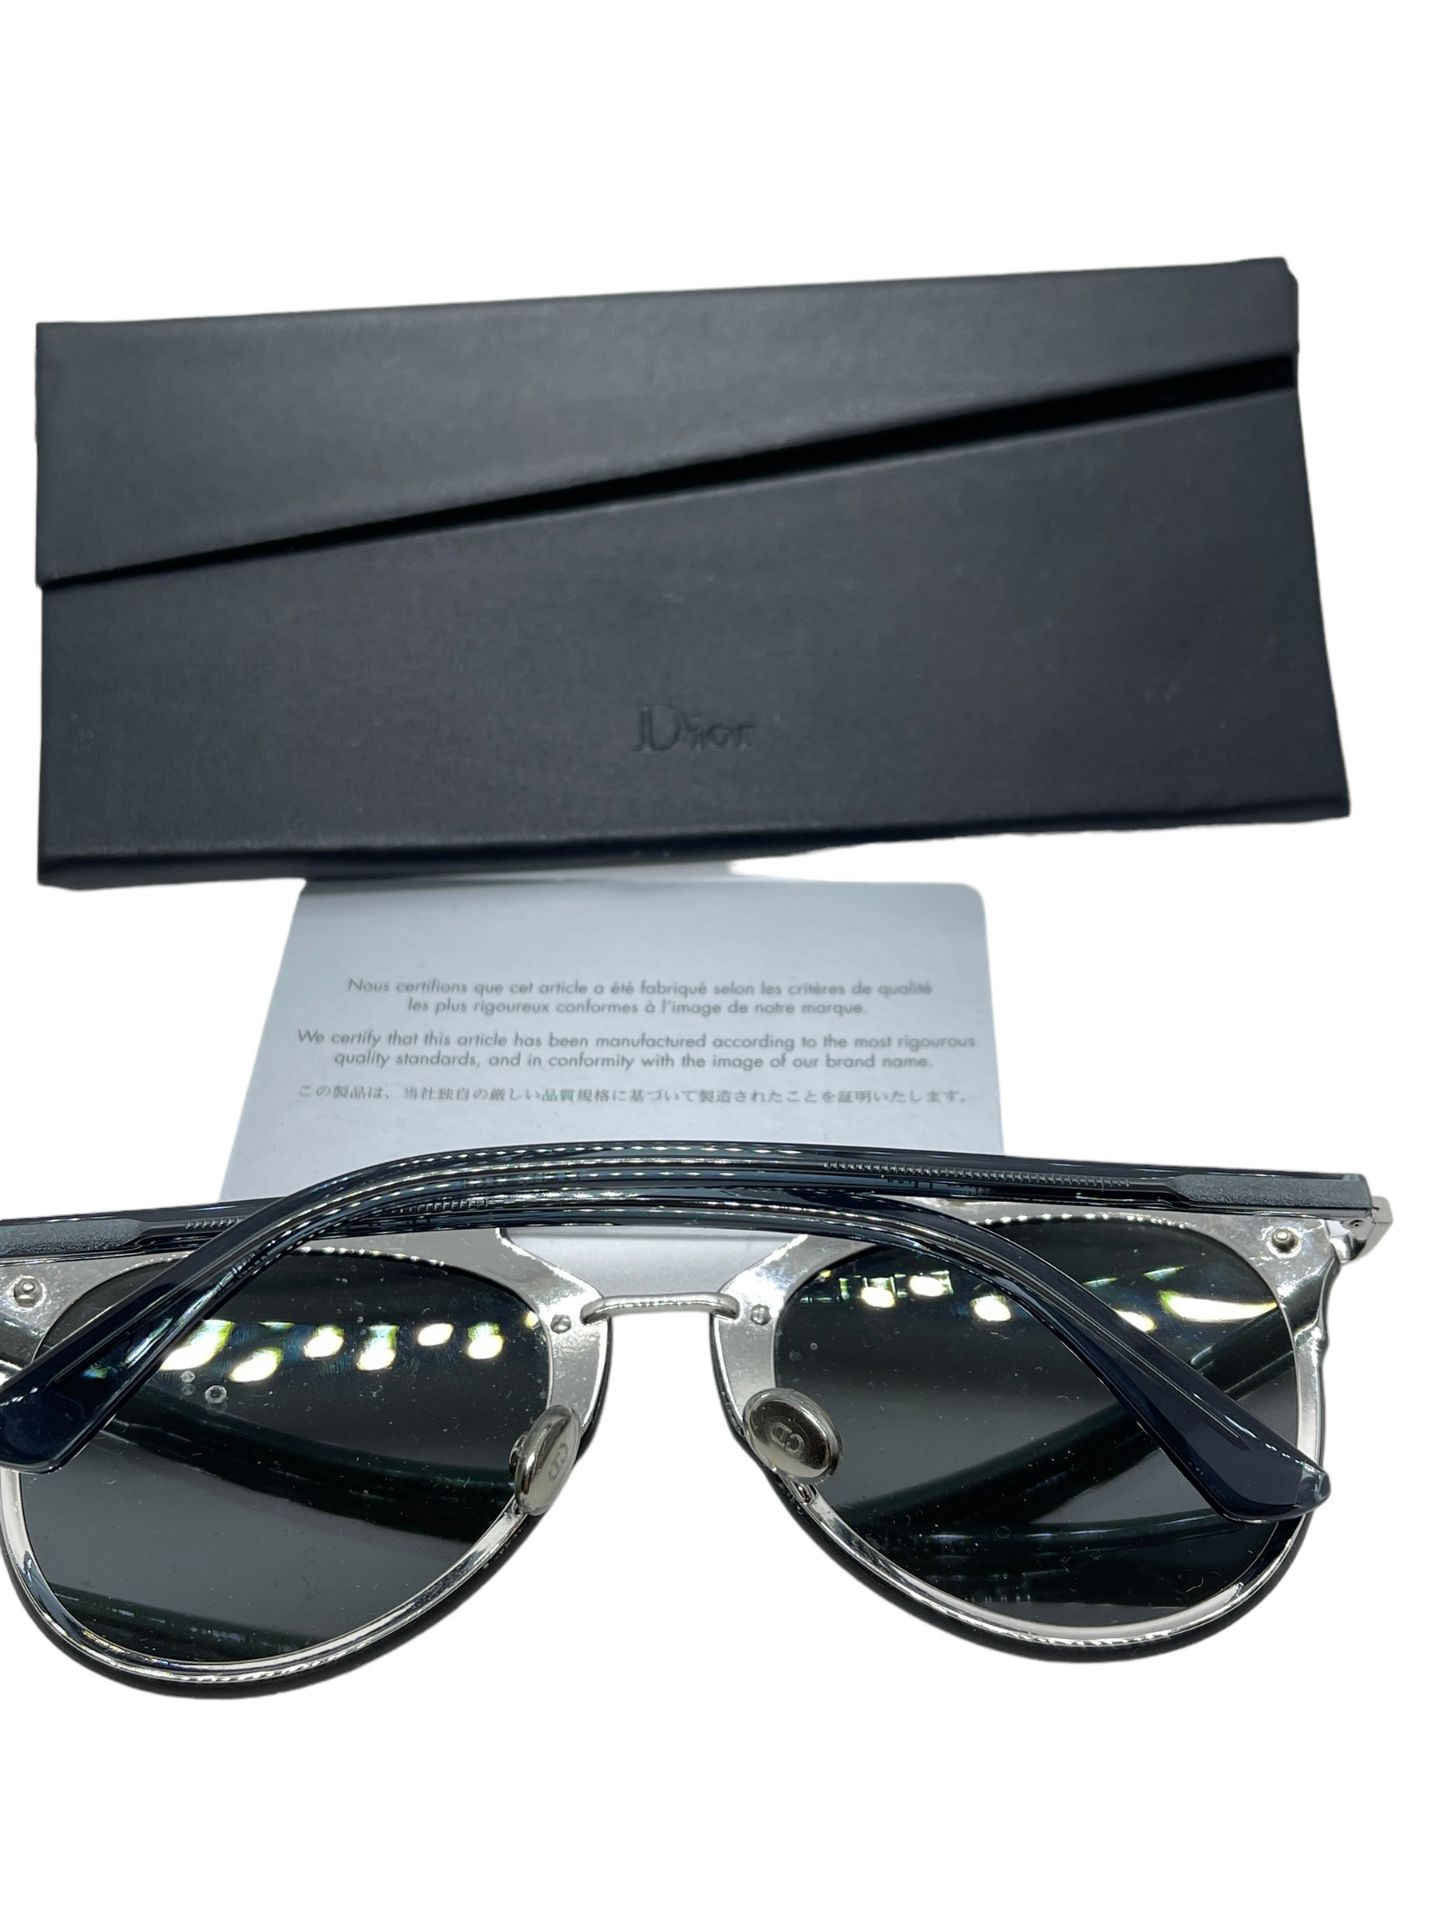 DIOR UNISEX SUNGLASSES XDEMO WITH BCASE PAPER ECT - Image 6 of 6